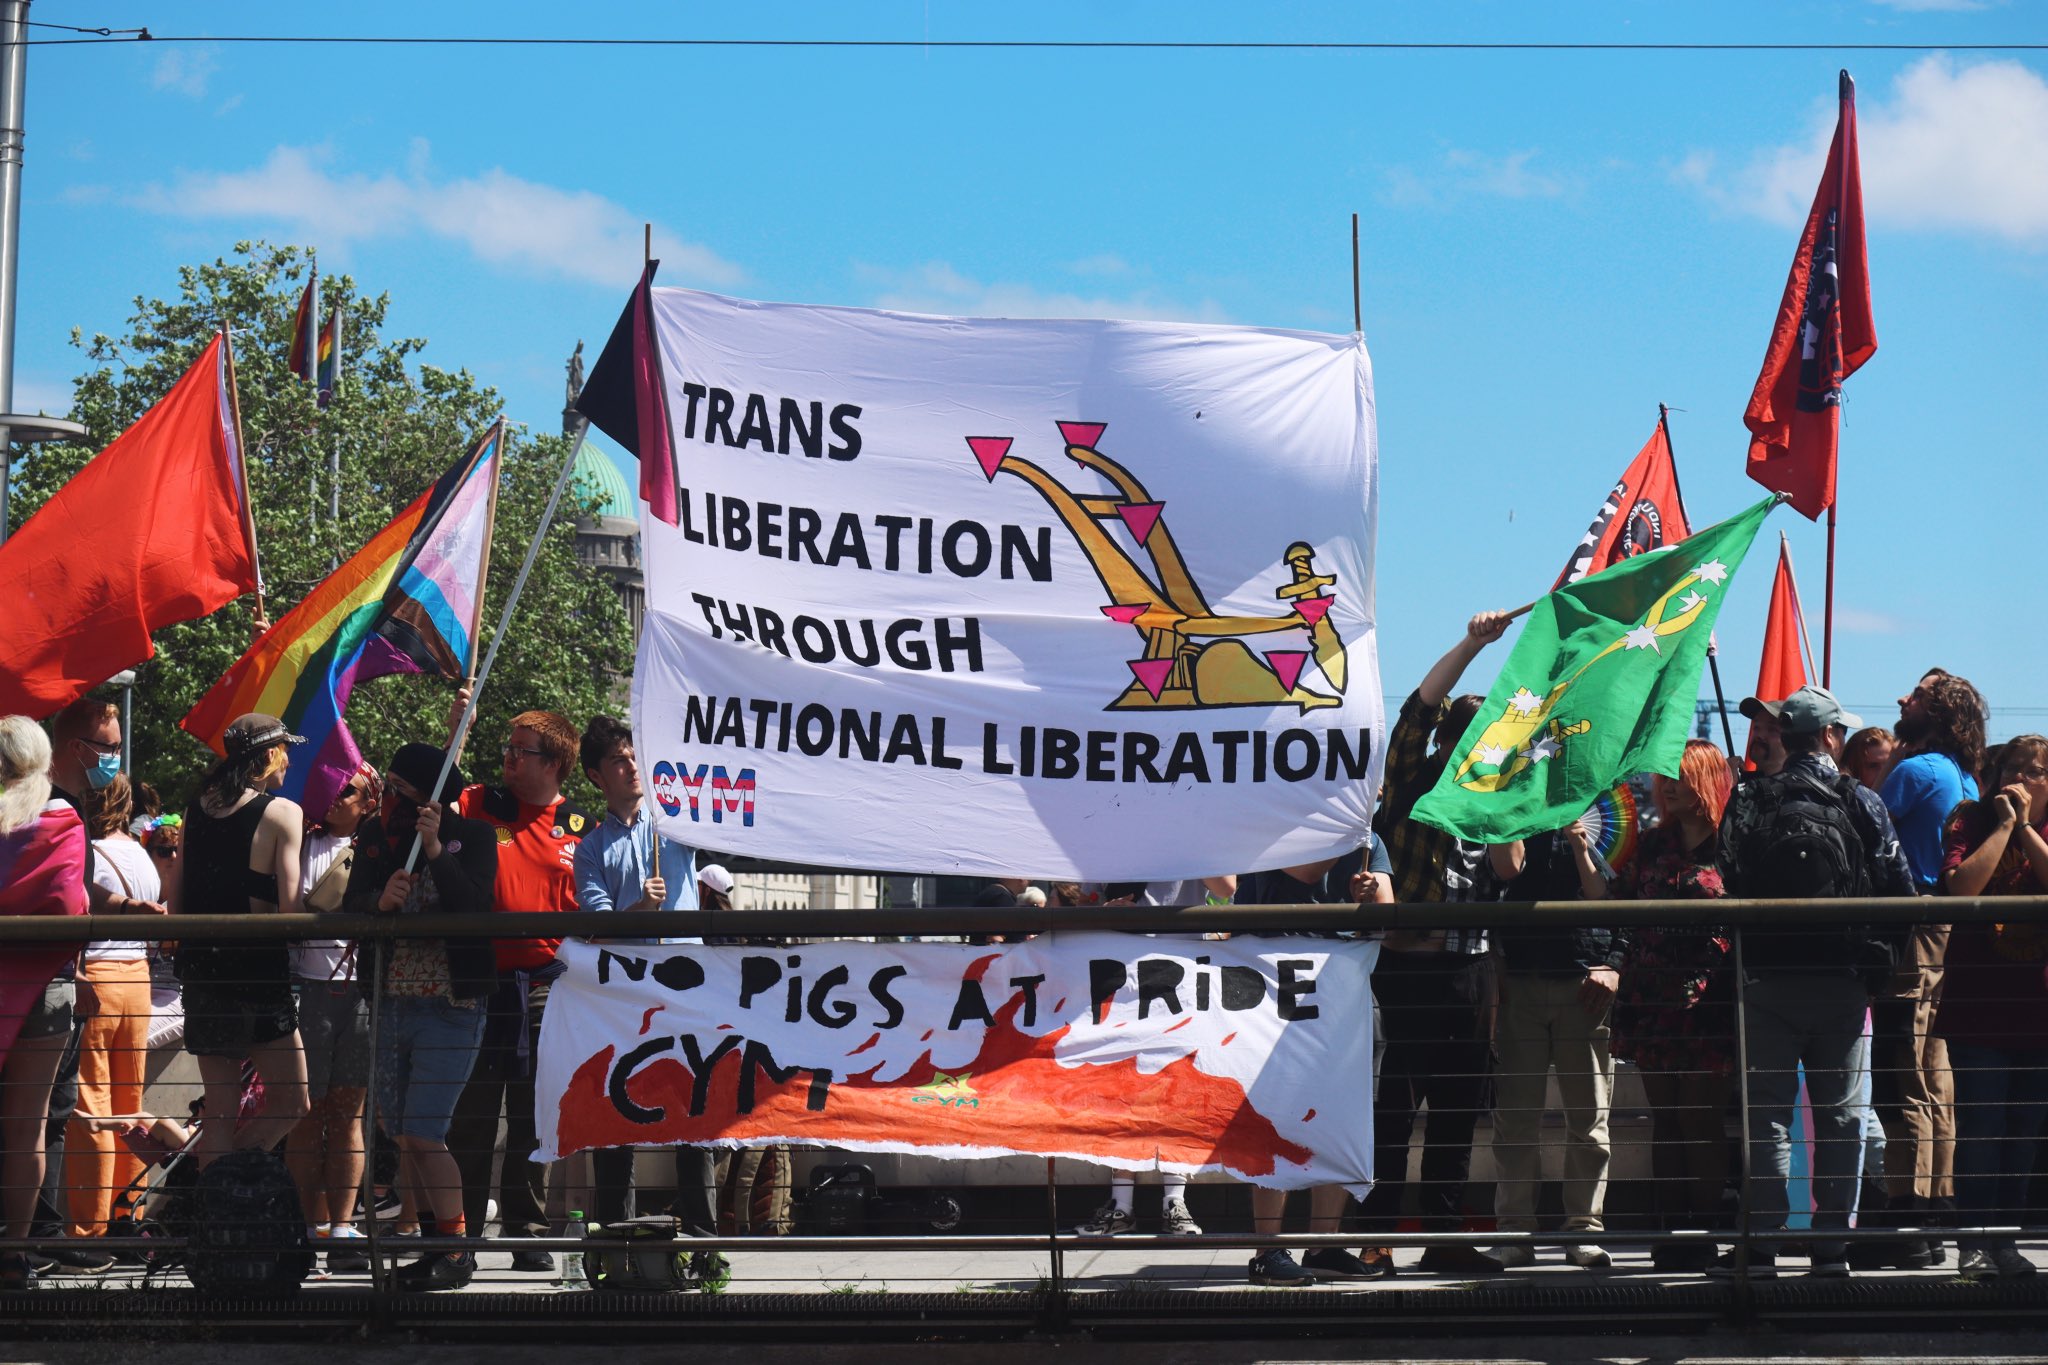 Two banners, one reading "Trans Liberation through National Liberation", another reading "No pigs at Pride" at alternative pride